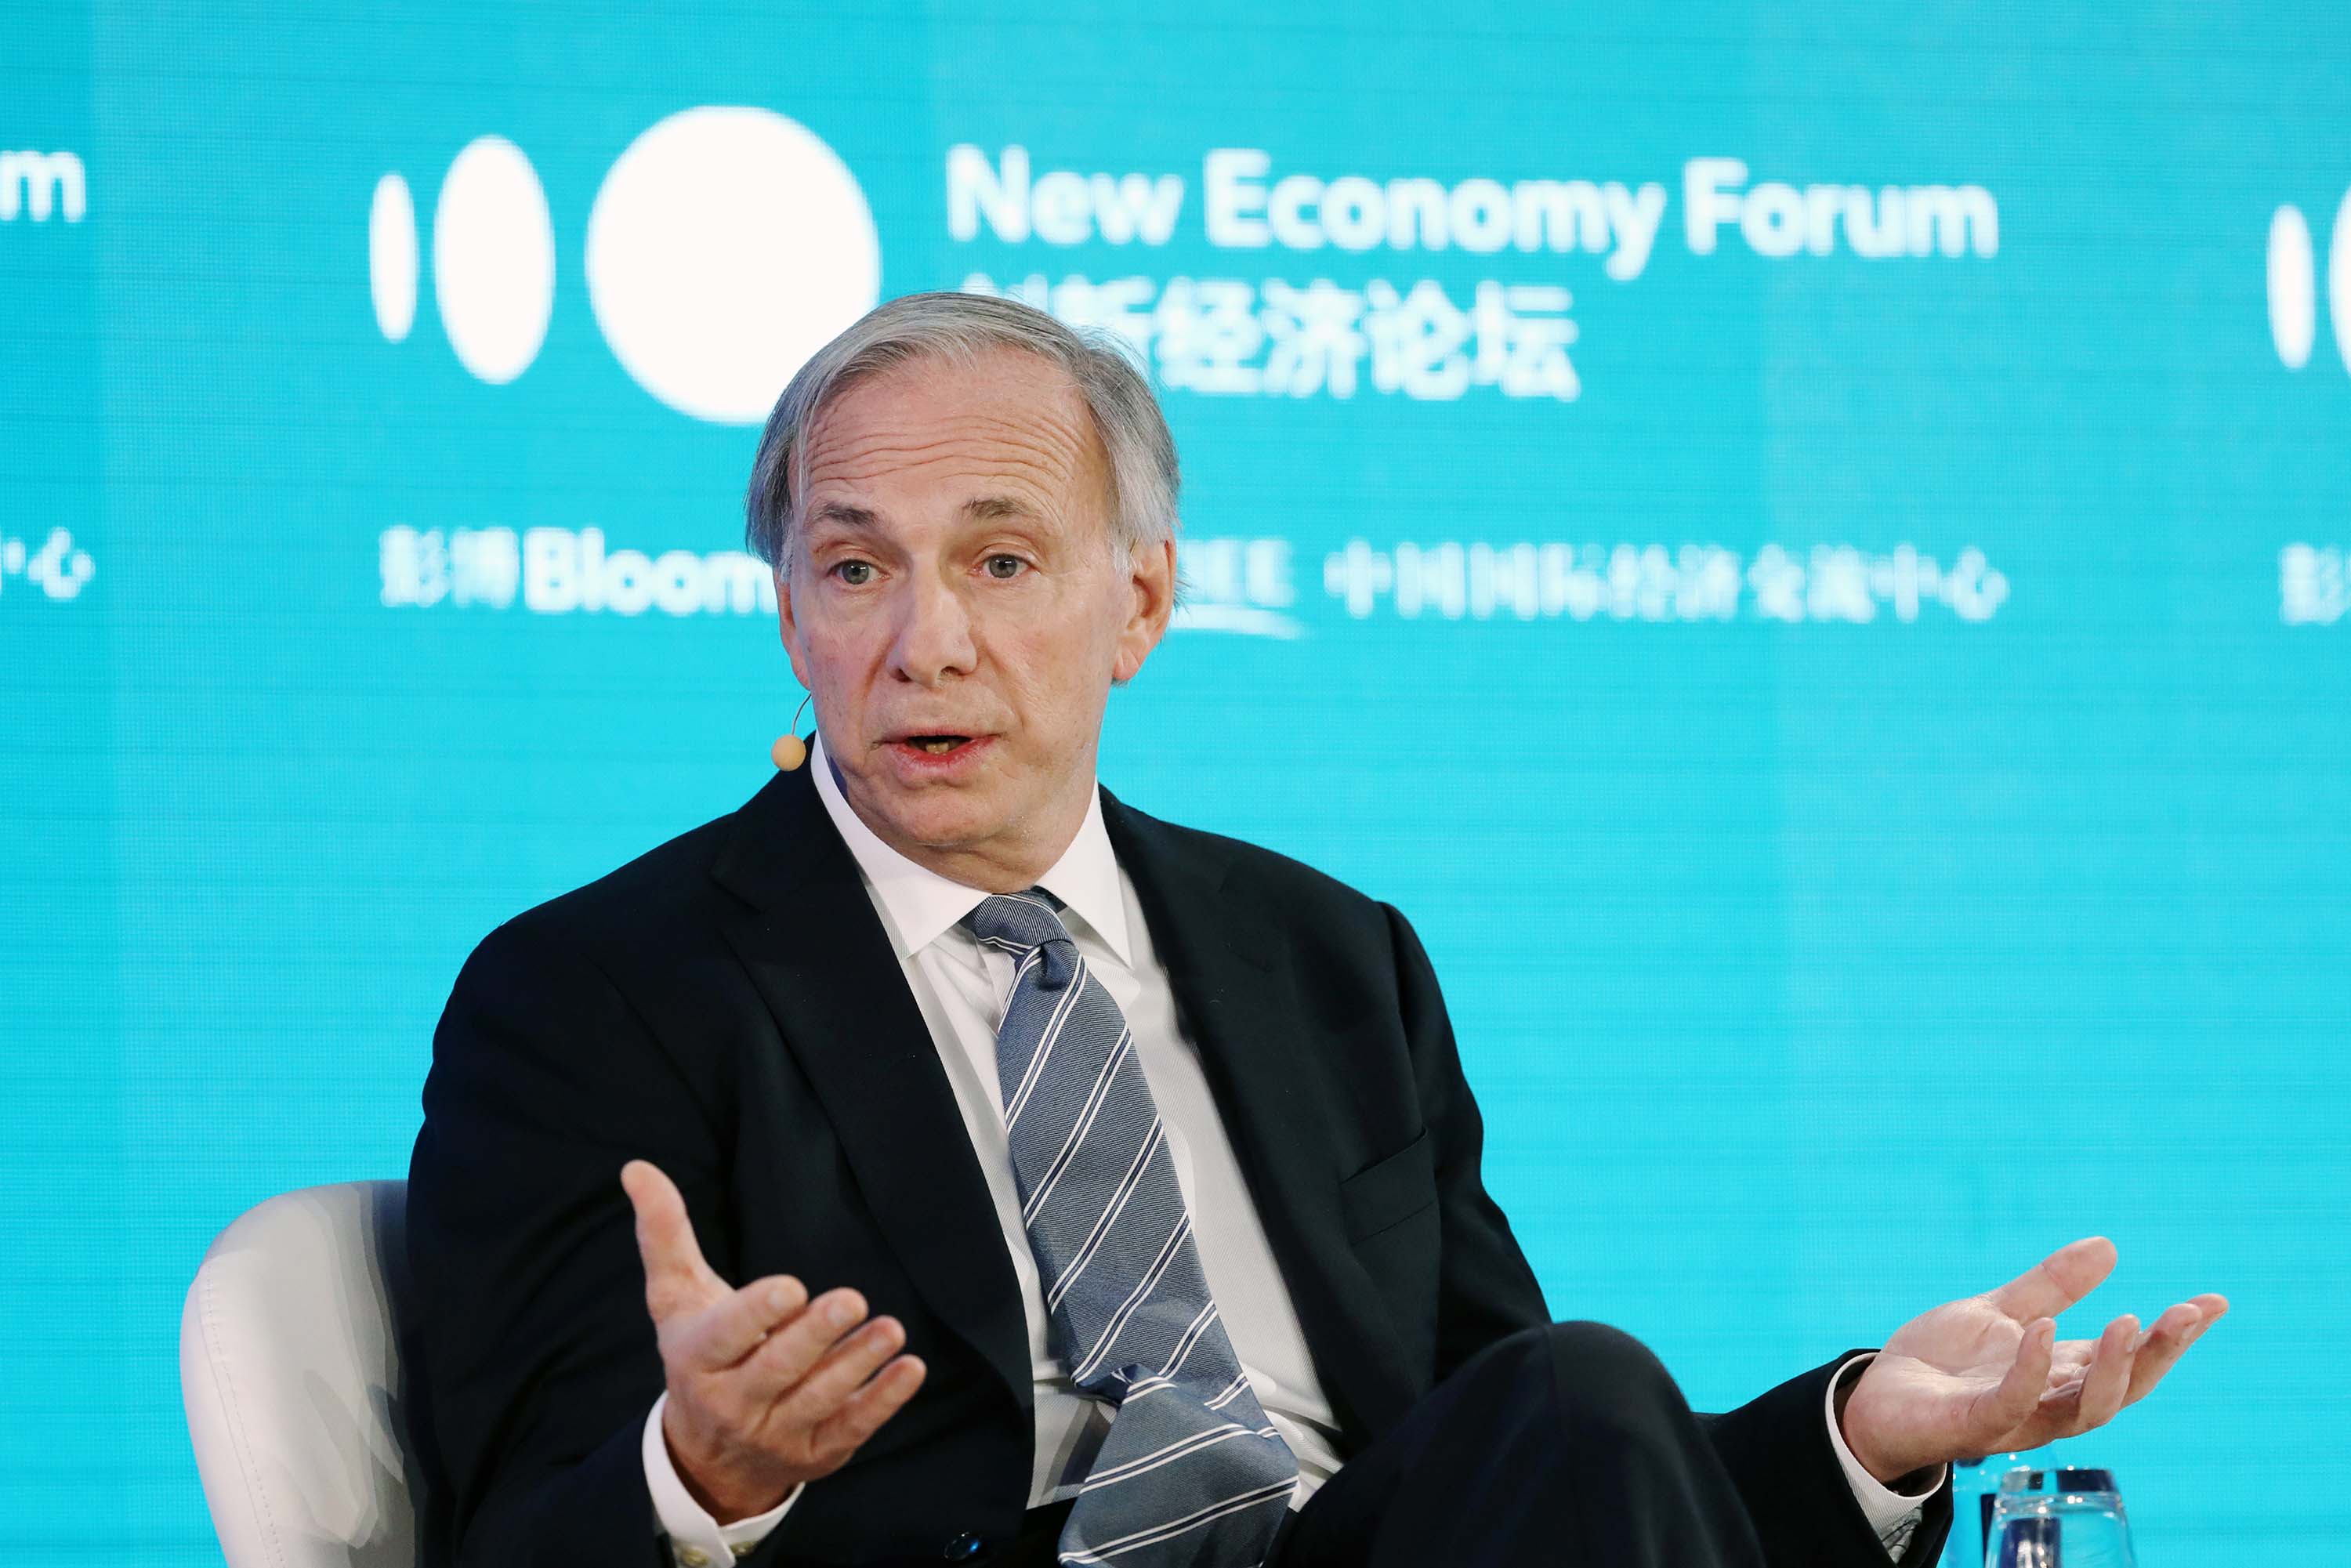 Ray Dalio warns that a 'Great Sag' is in store for the global economy